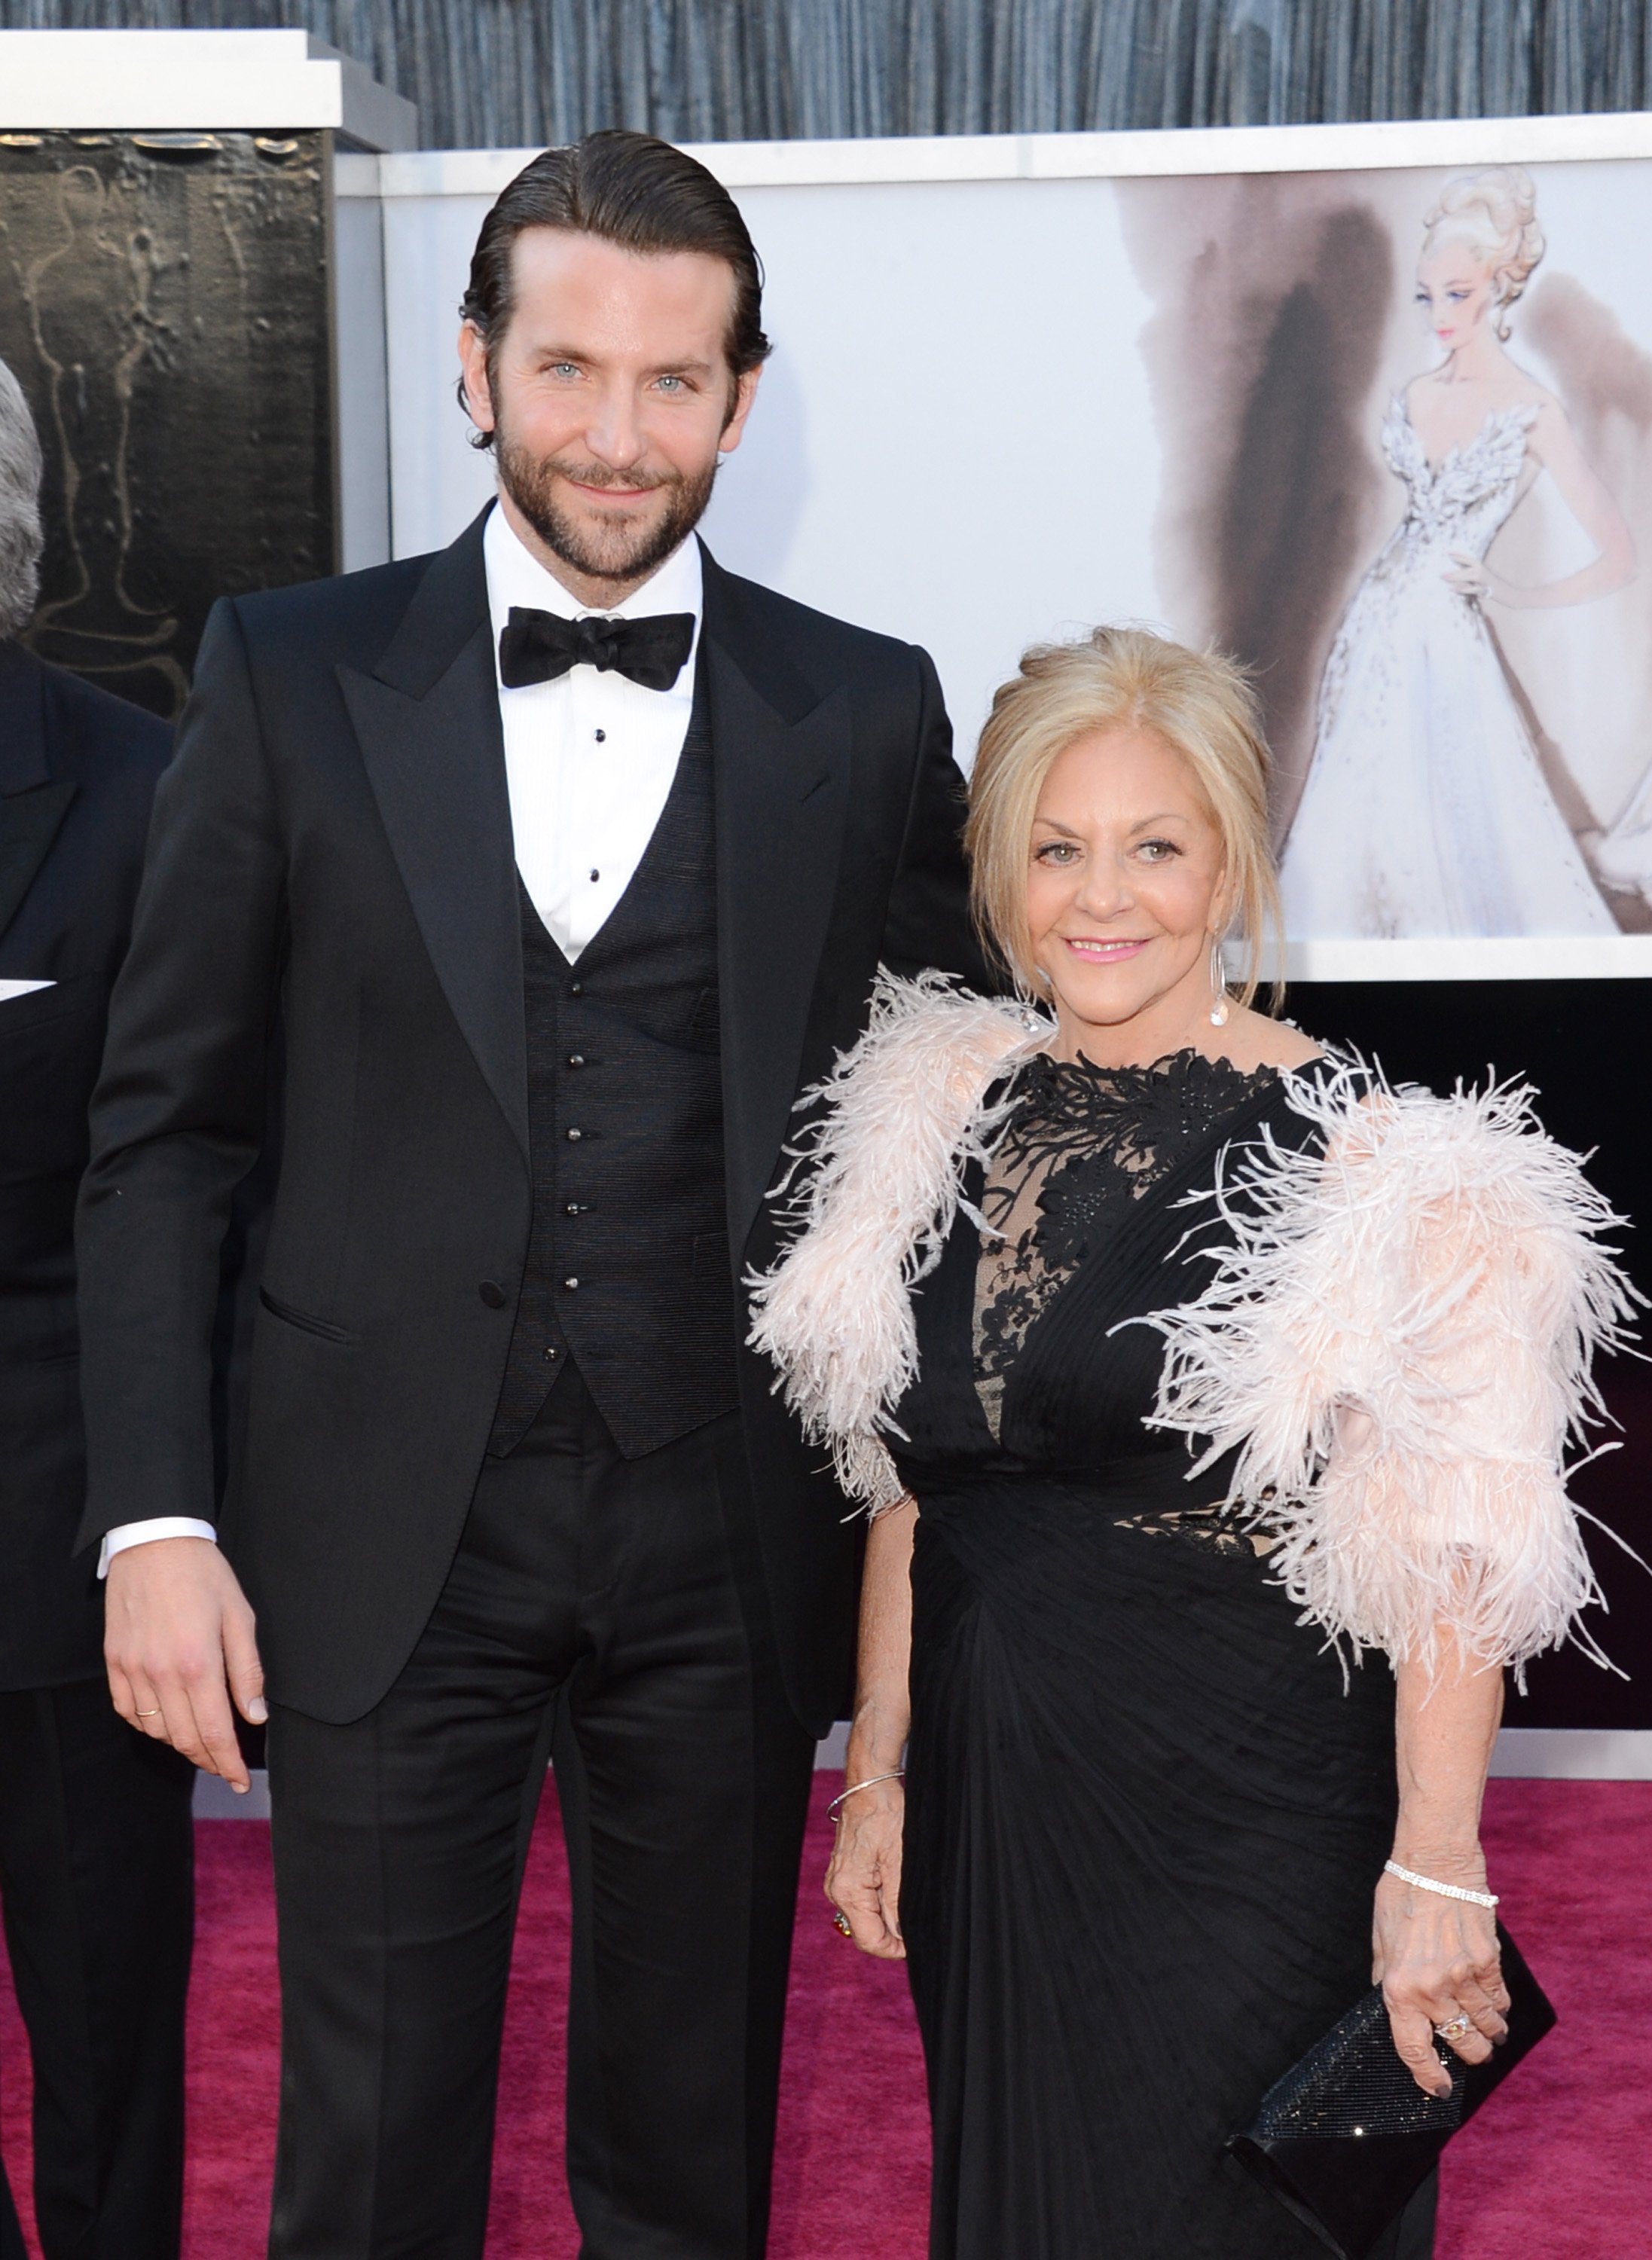 Actor Bradley Cooper and mother Gloria Cooper arrive at the Oscars at Hollywood & Highland Center on February 24, 2013 in Hollywood, California | Source: Getty Images